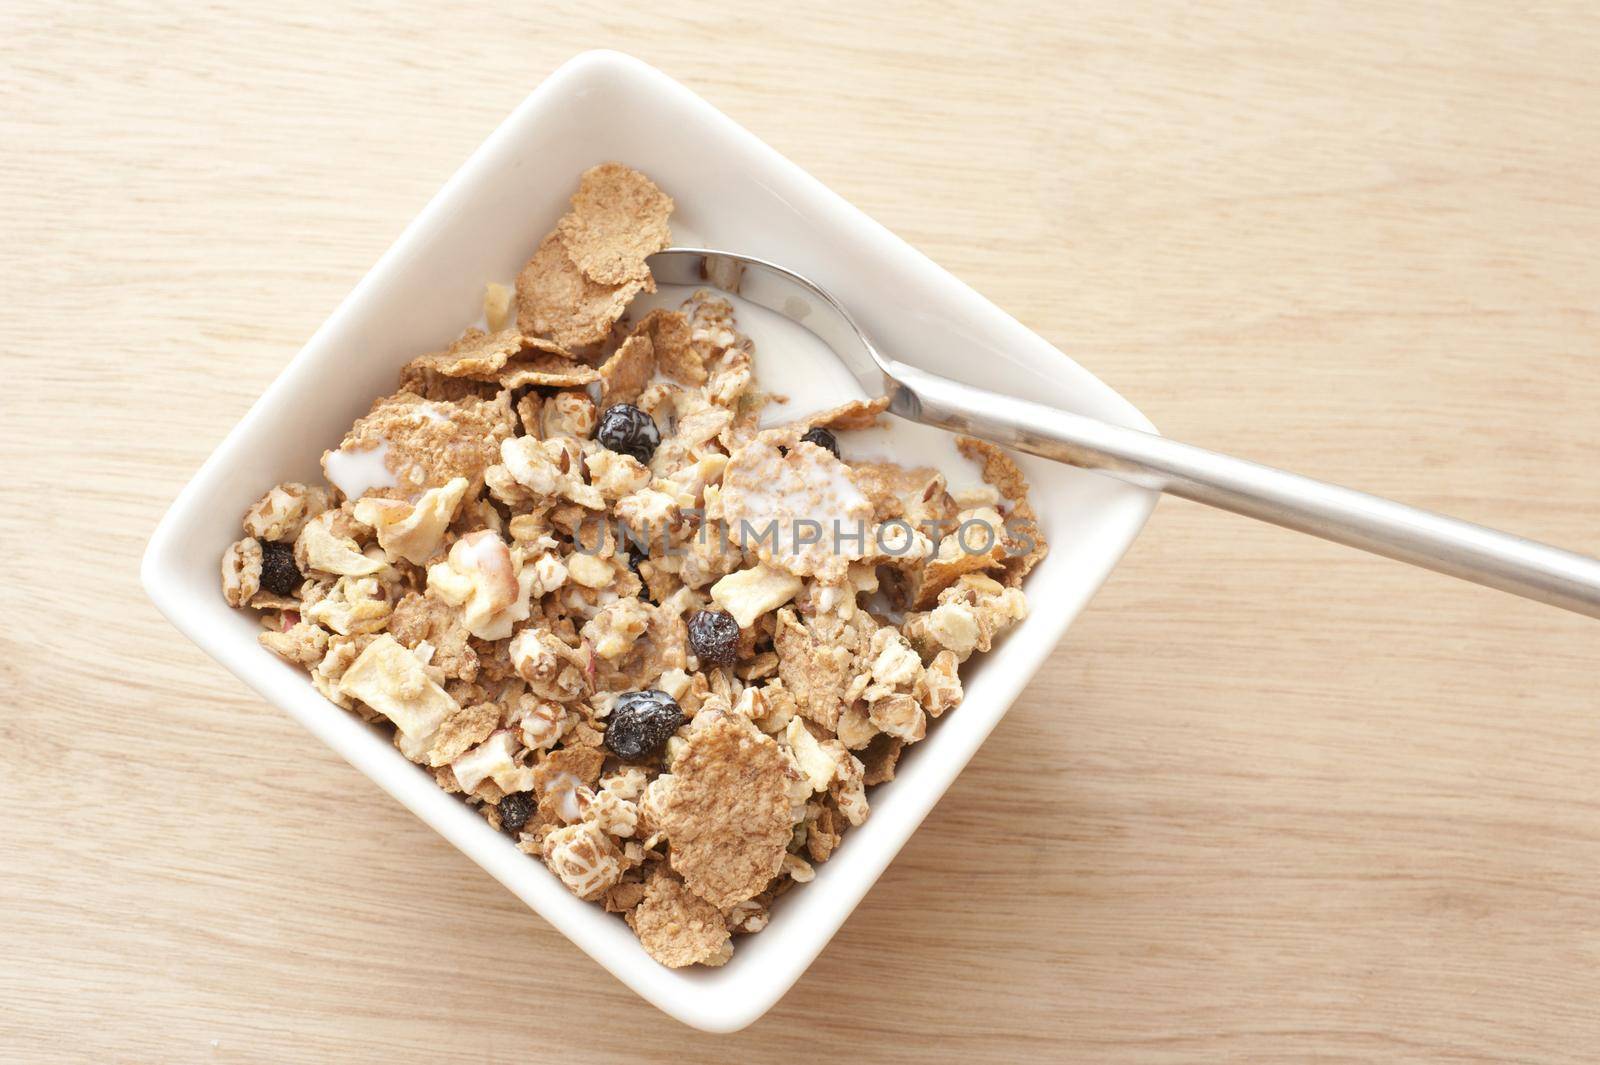 First person perspective view of spoon in square bowl of muesli granola cereal with slices of dried fruit on top with milk over wooden table